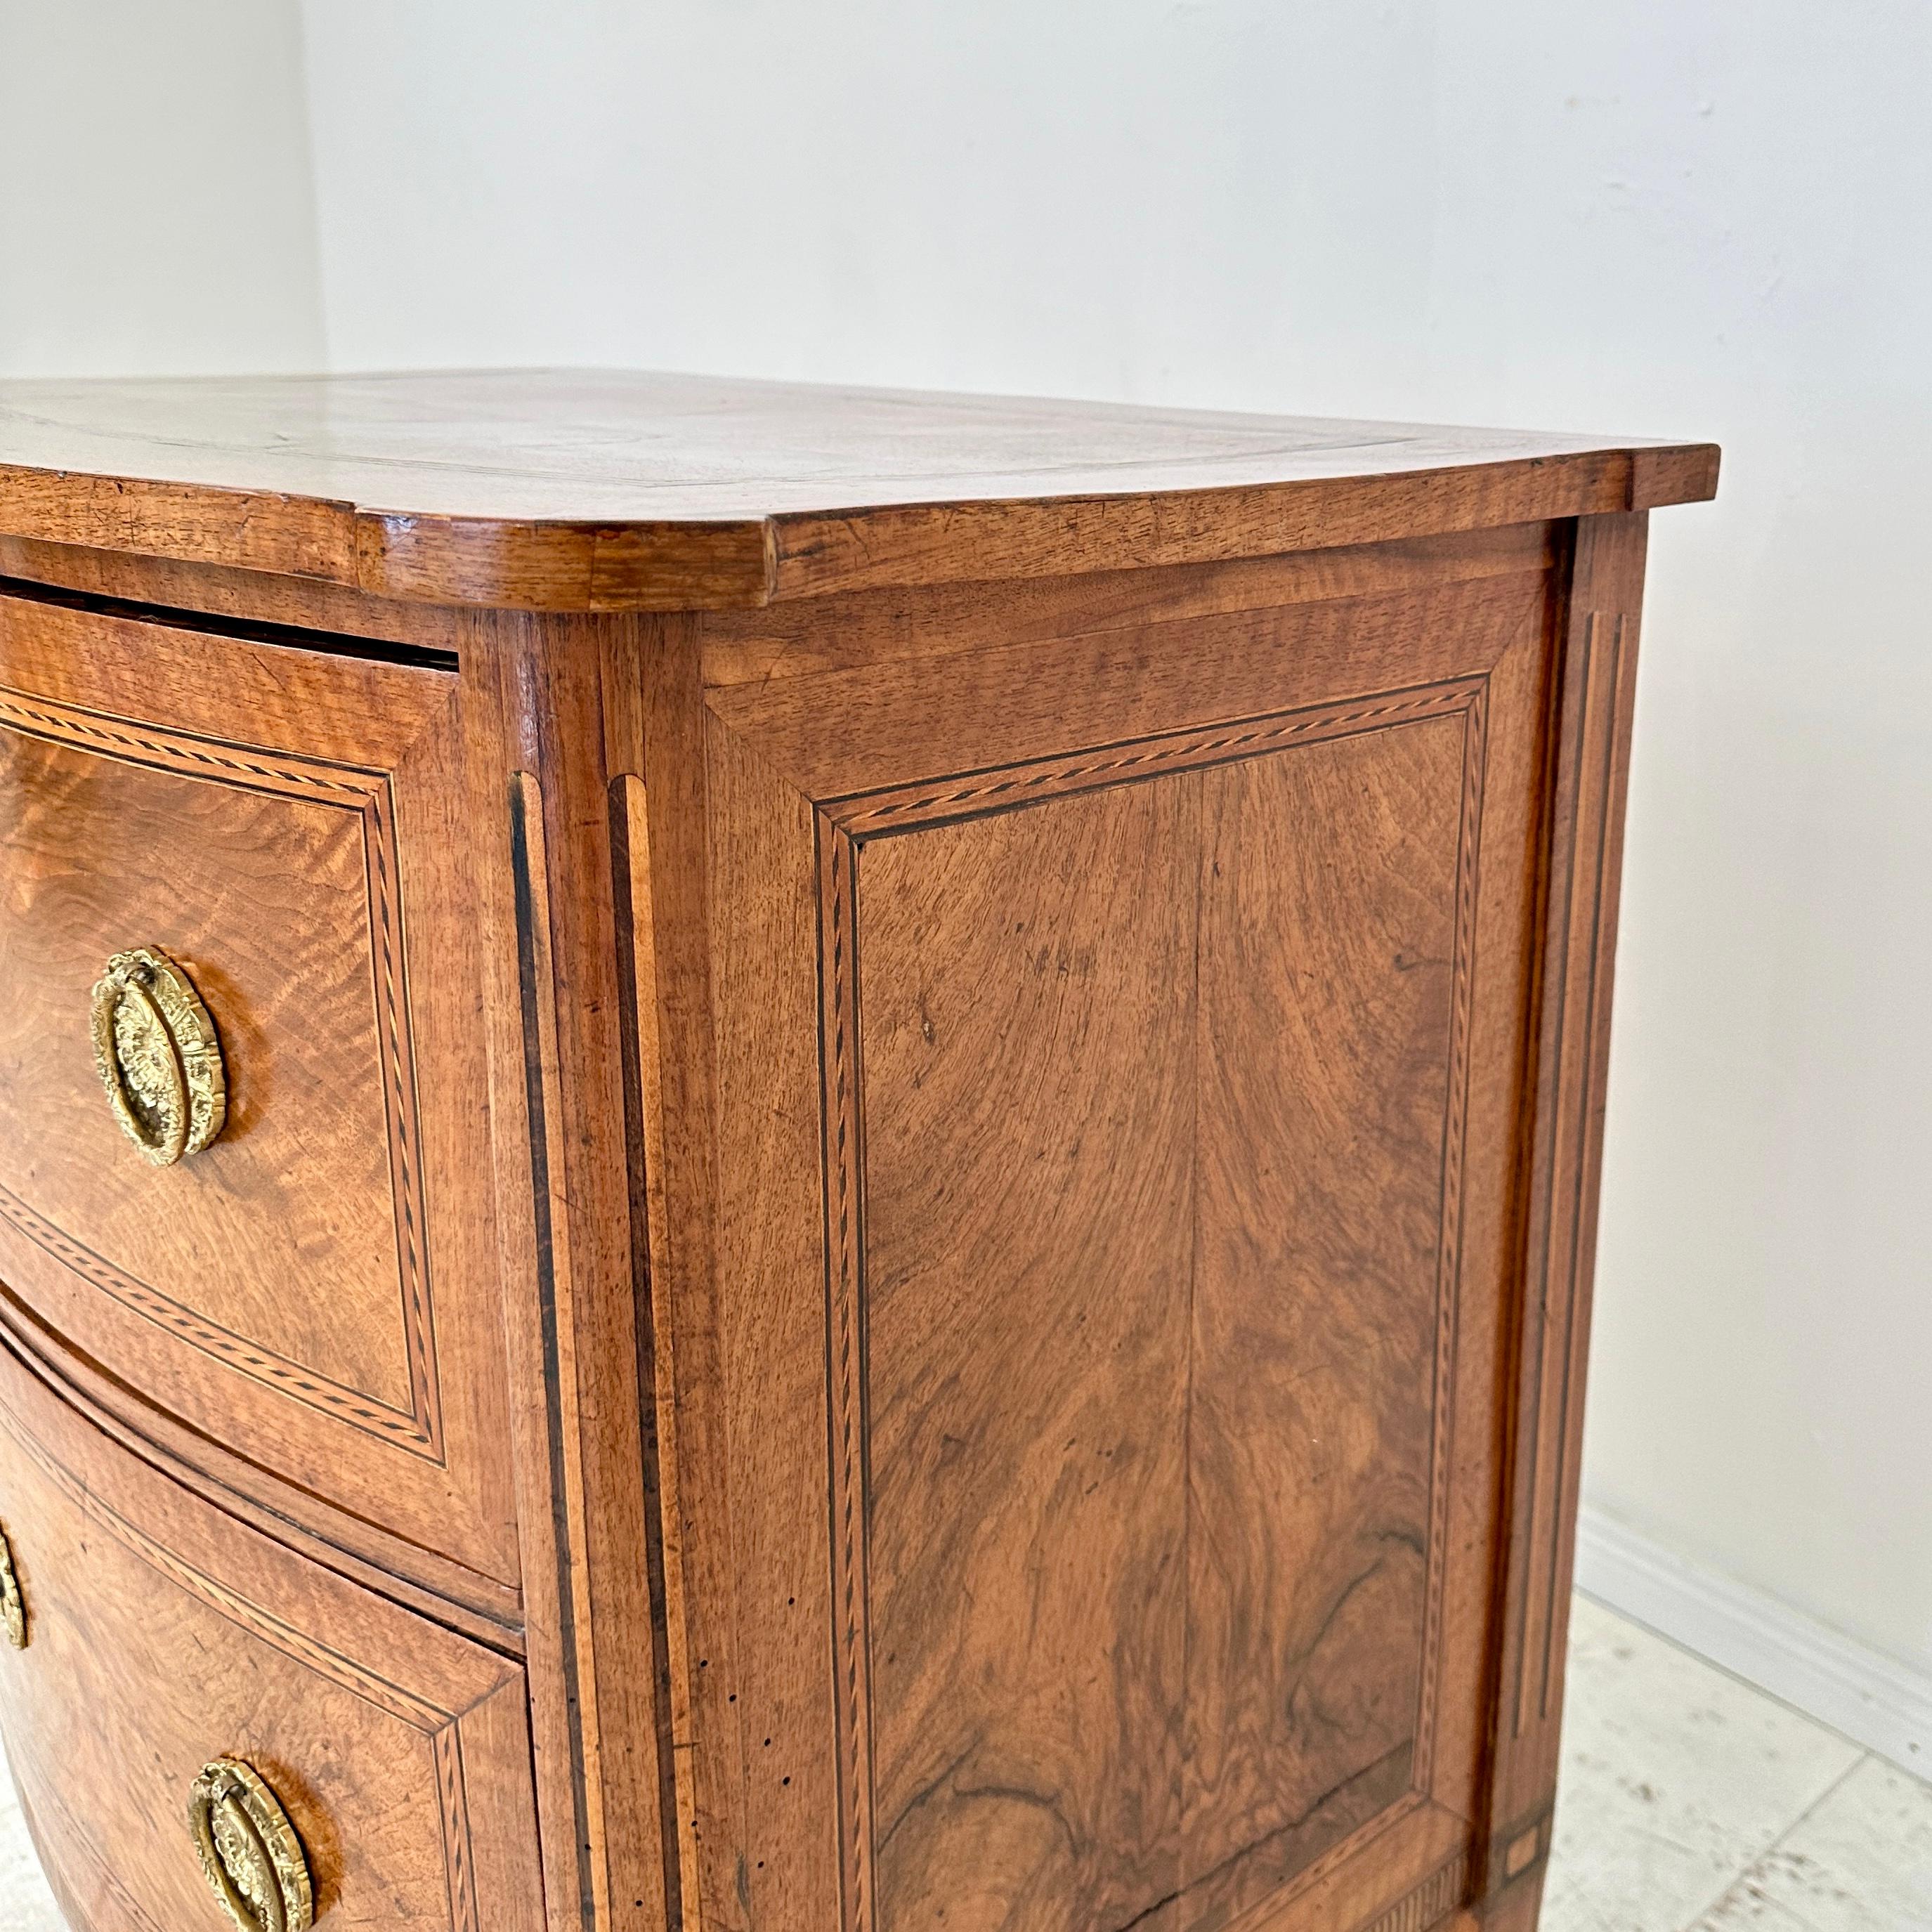 Small 18th Century German Louis Seize Commode in Walnut with 2 Drawers, 1790 For Sale 9